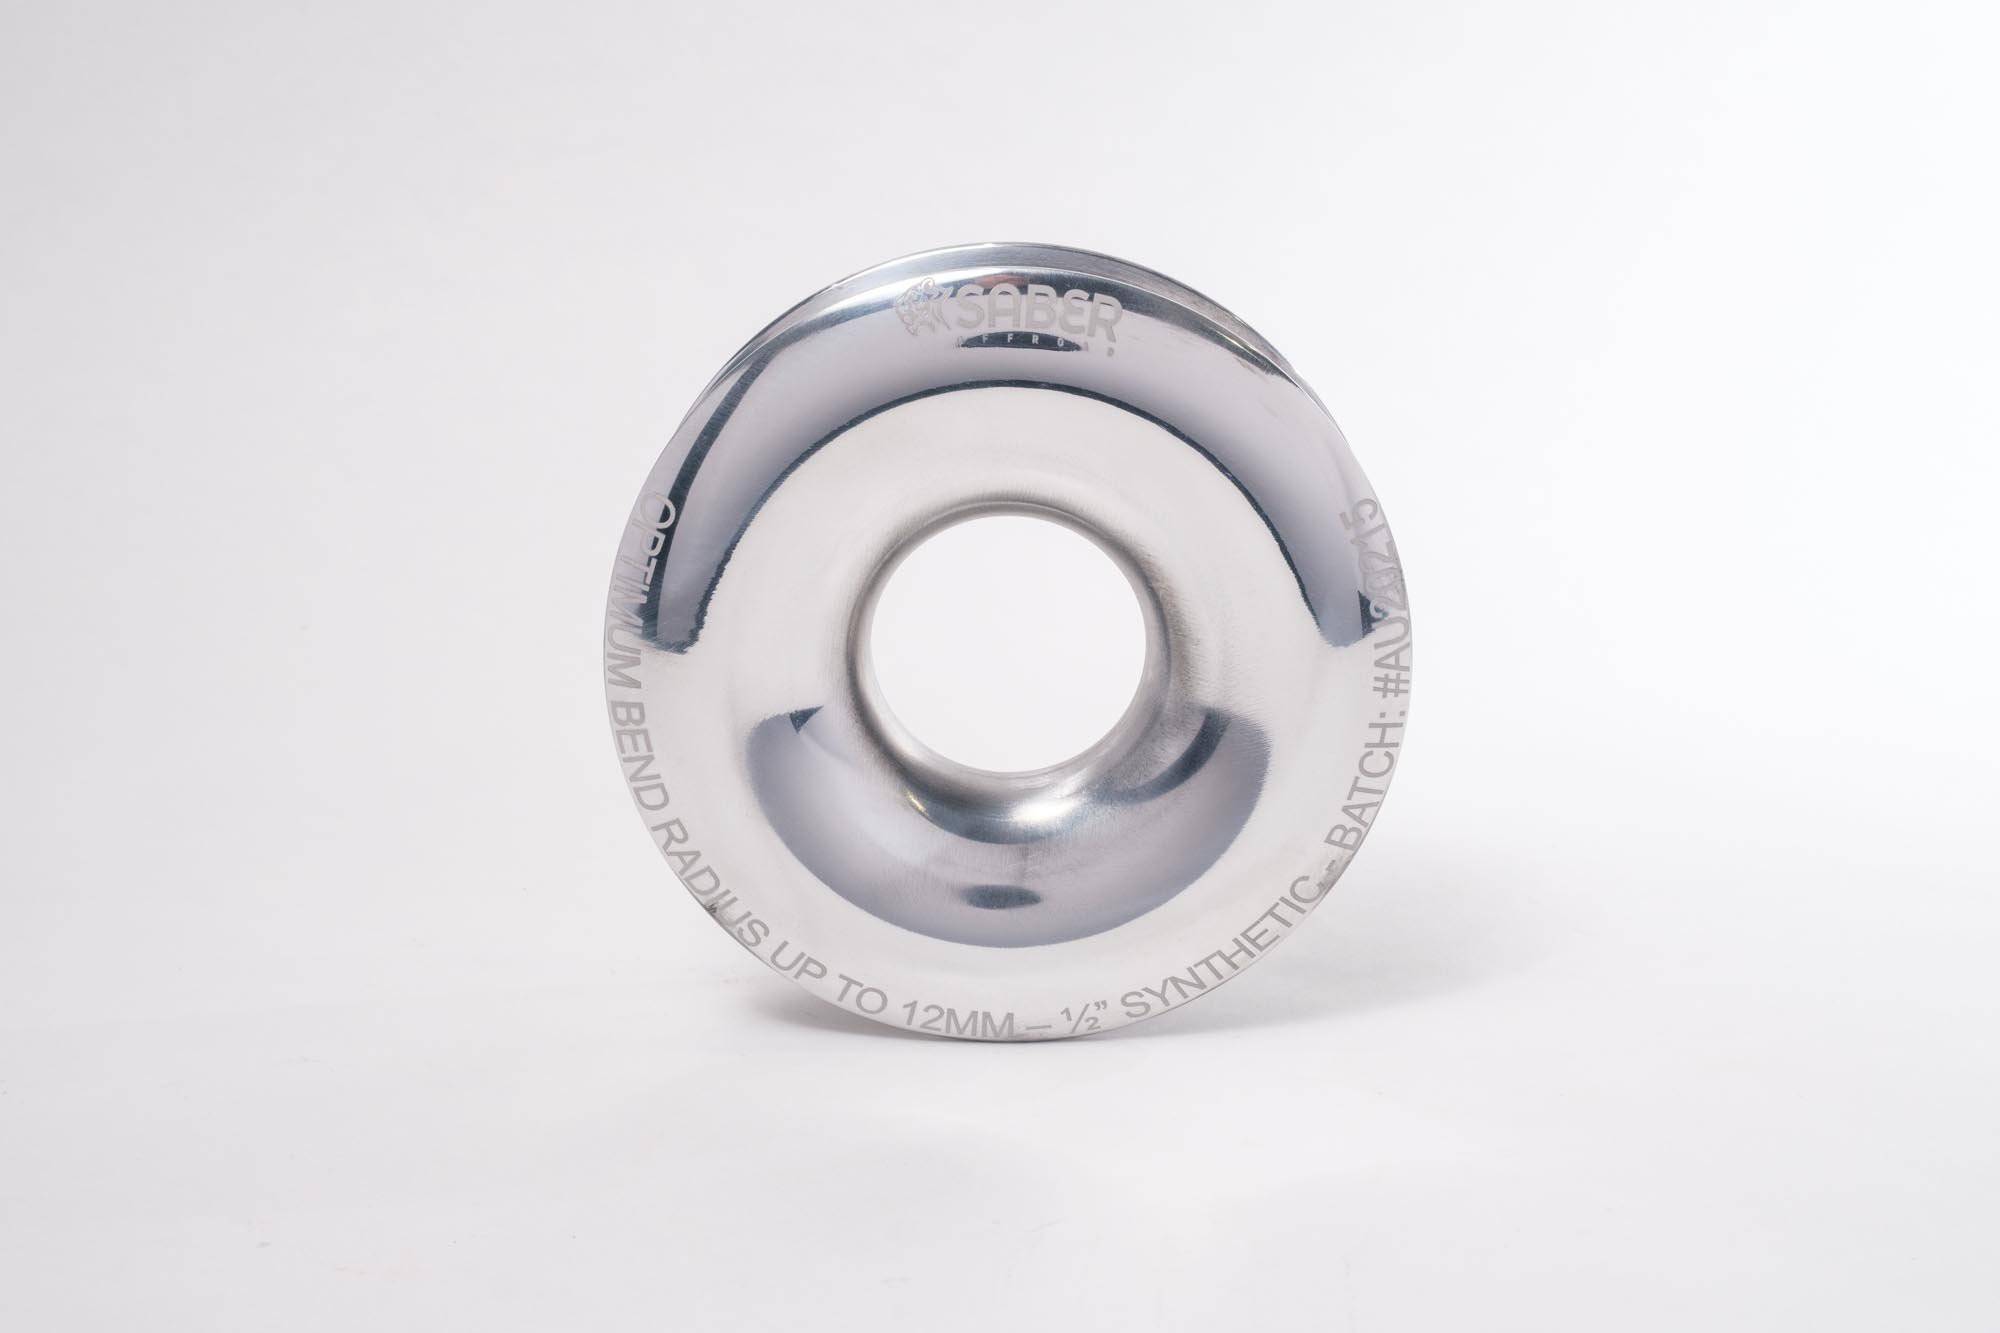 Saber Offroad Ezy-Glide Recovery Ring - Polished Alloy | Saber Offroad